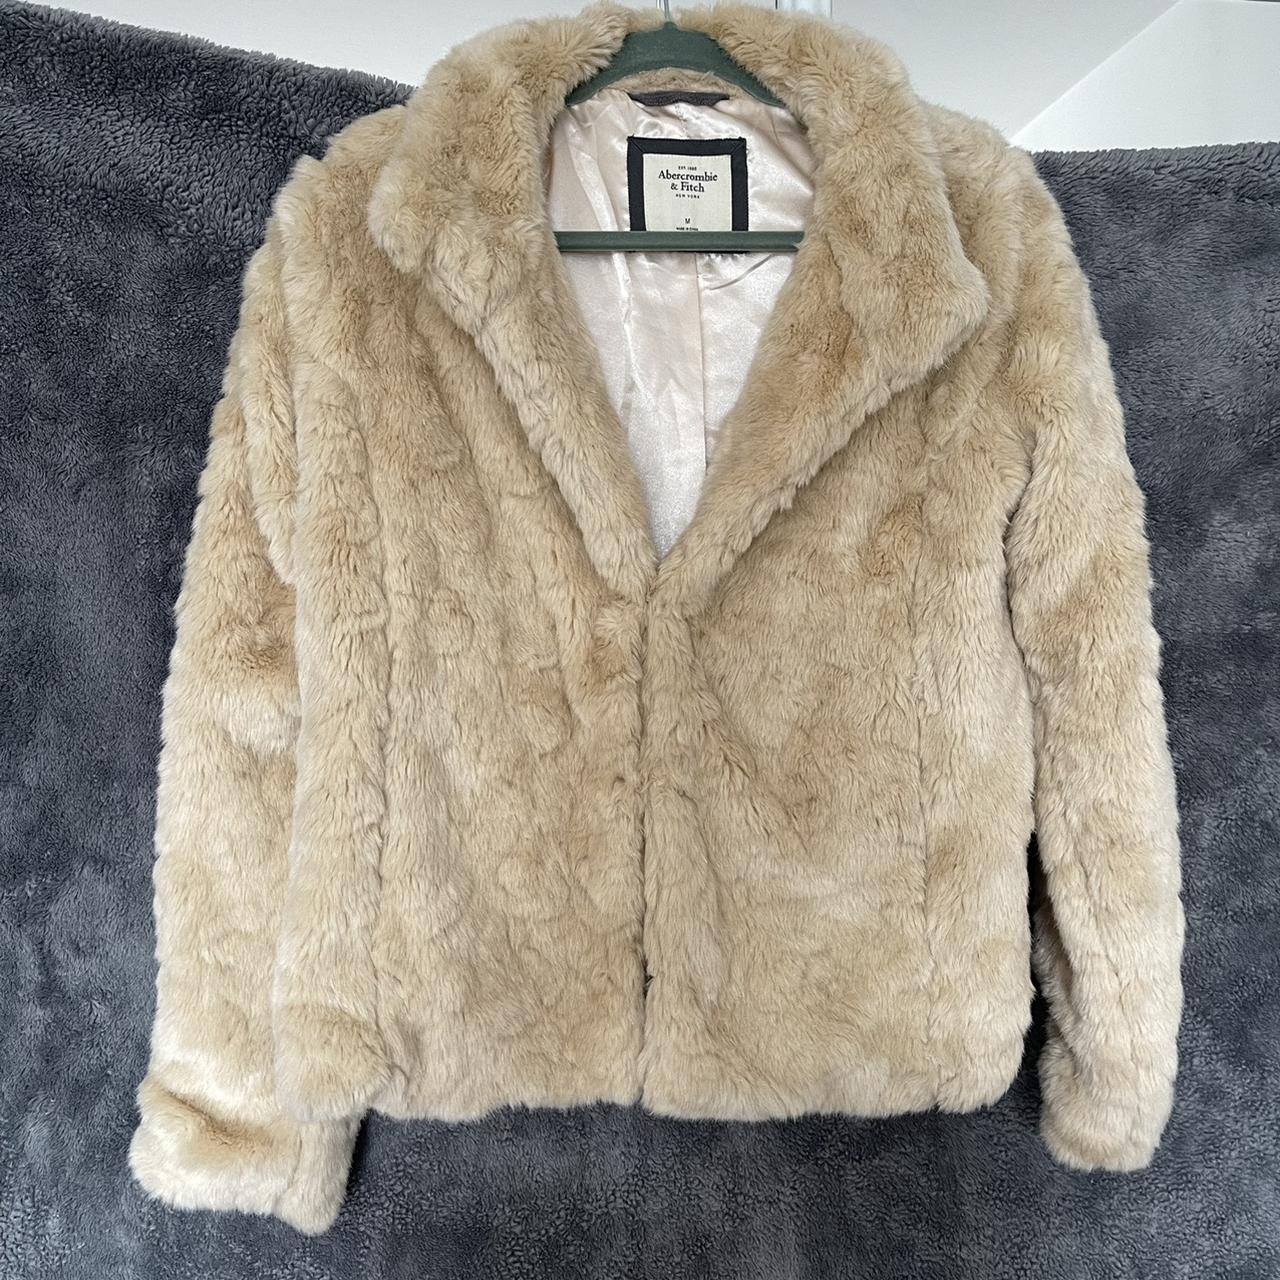 Abercrombie & Fitch Women's Cream and Tan Coat | Depop